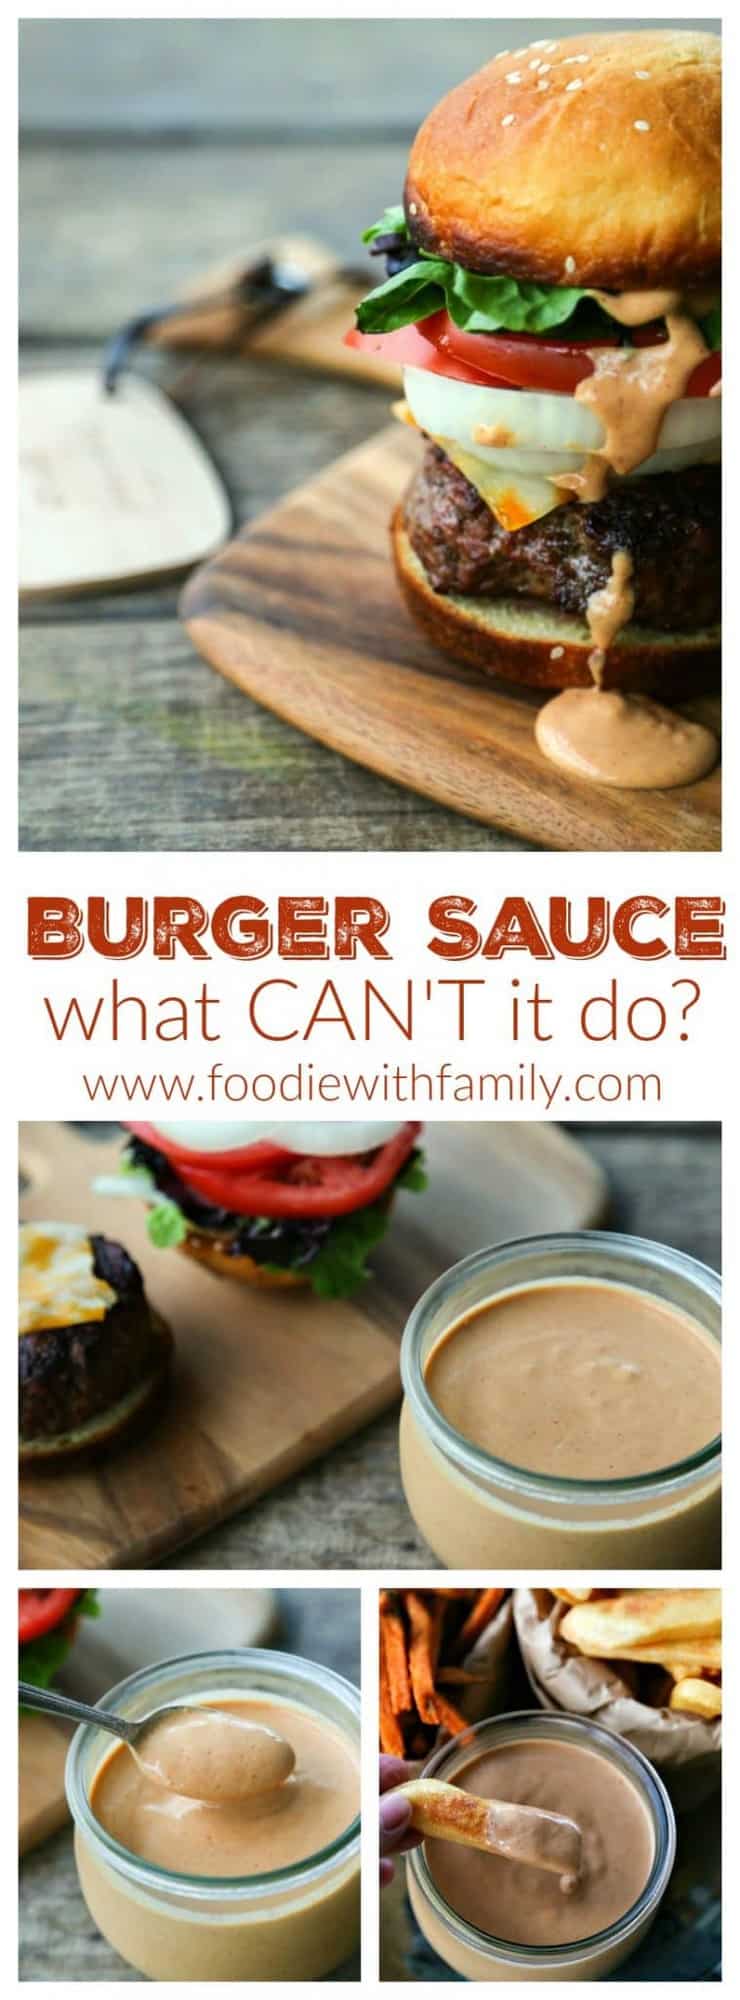 Burger Sauce from foodiewithfamily.com